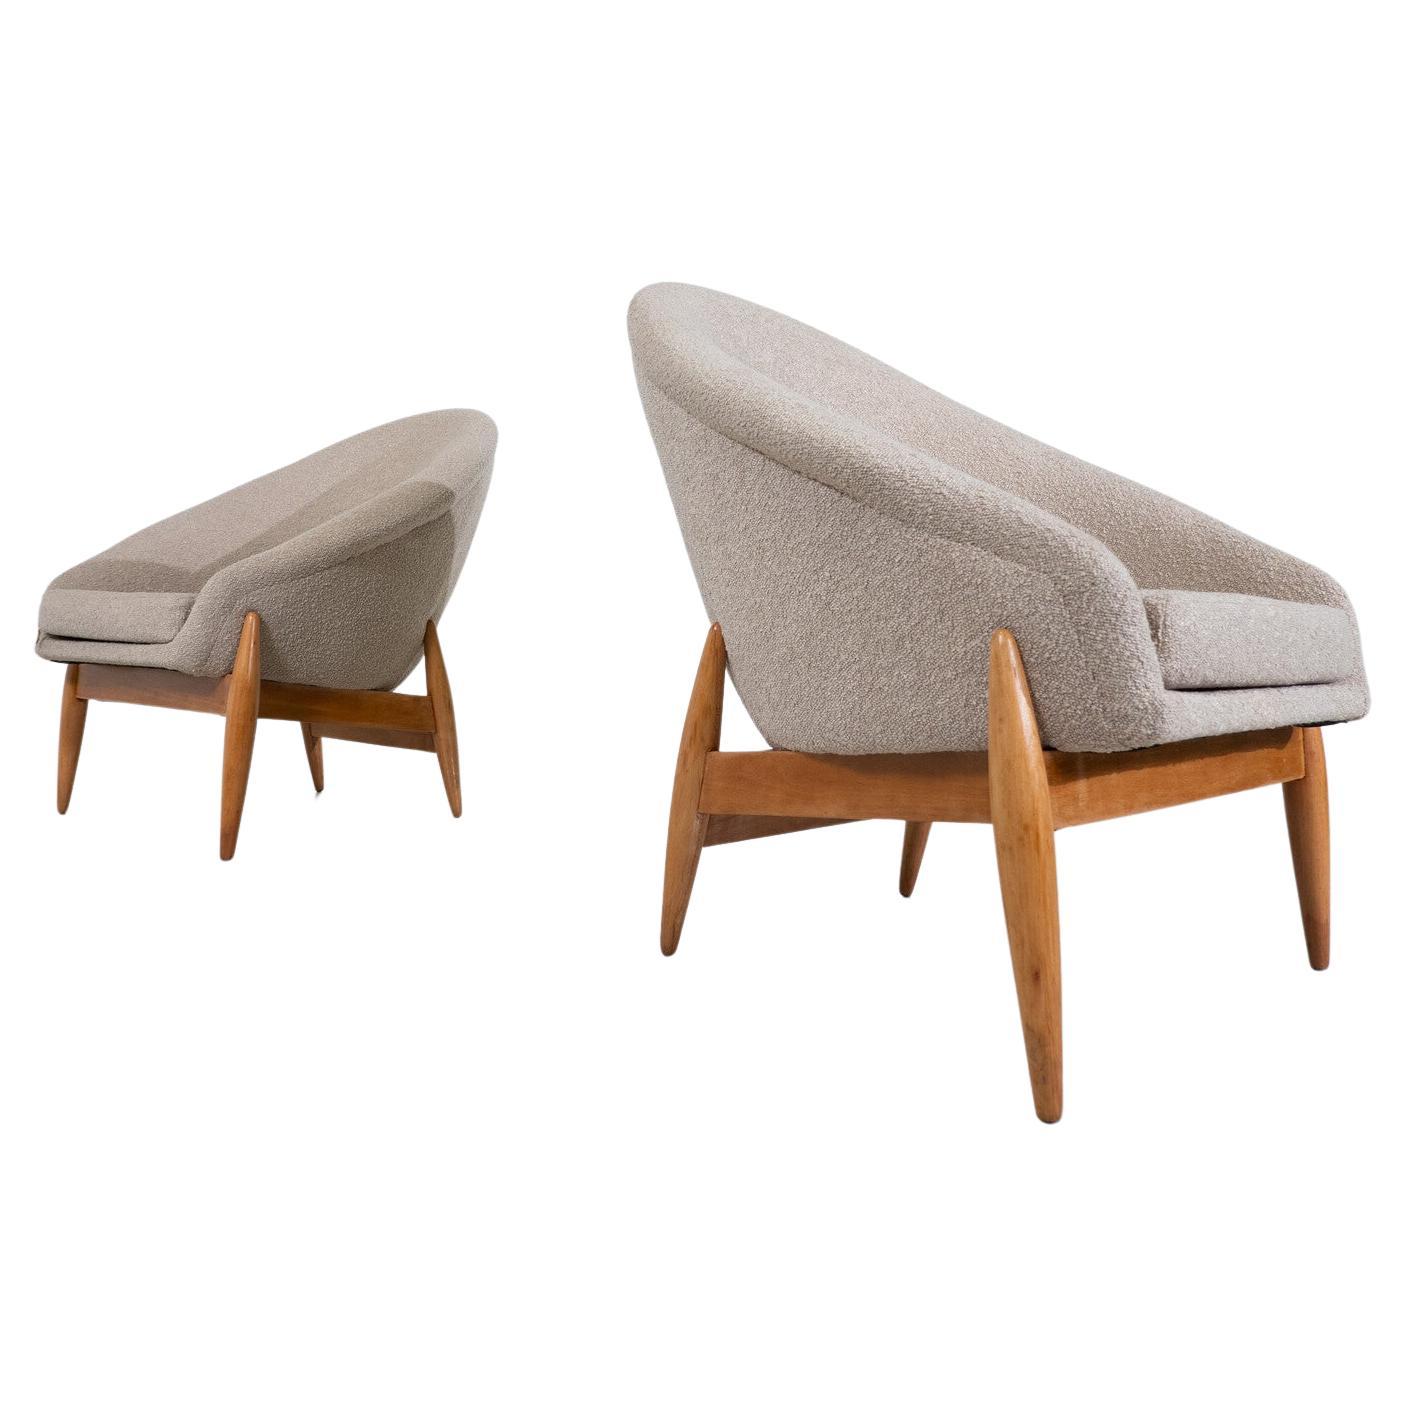 Pair of Mid-Century Modern Beige Fabric Armchairs by Julia Gaubek - Hungary 1950 For Sale